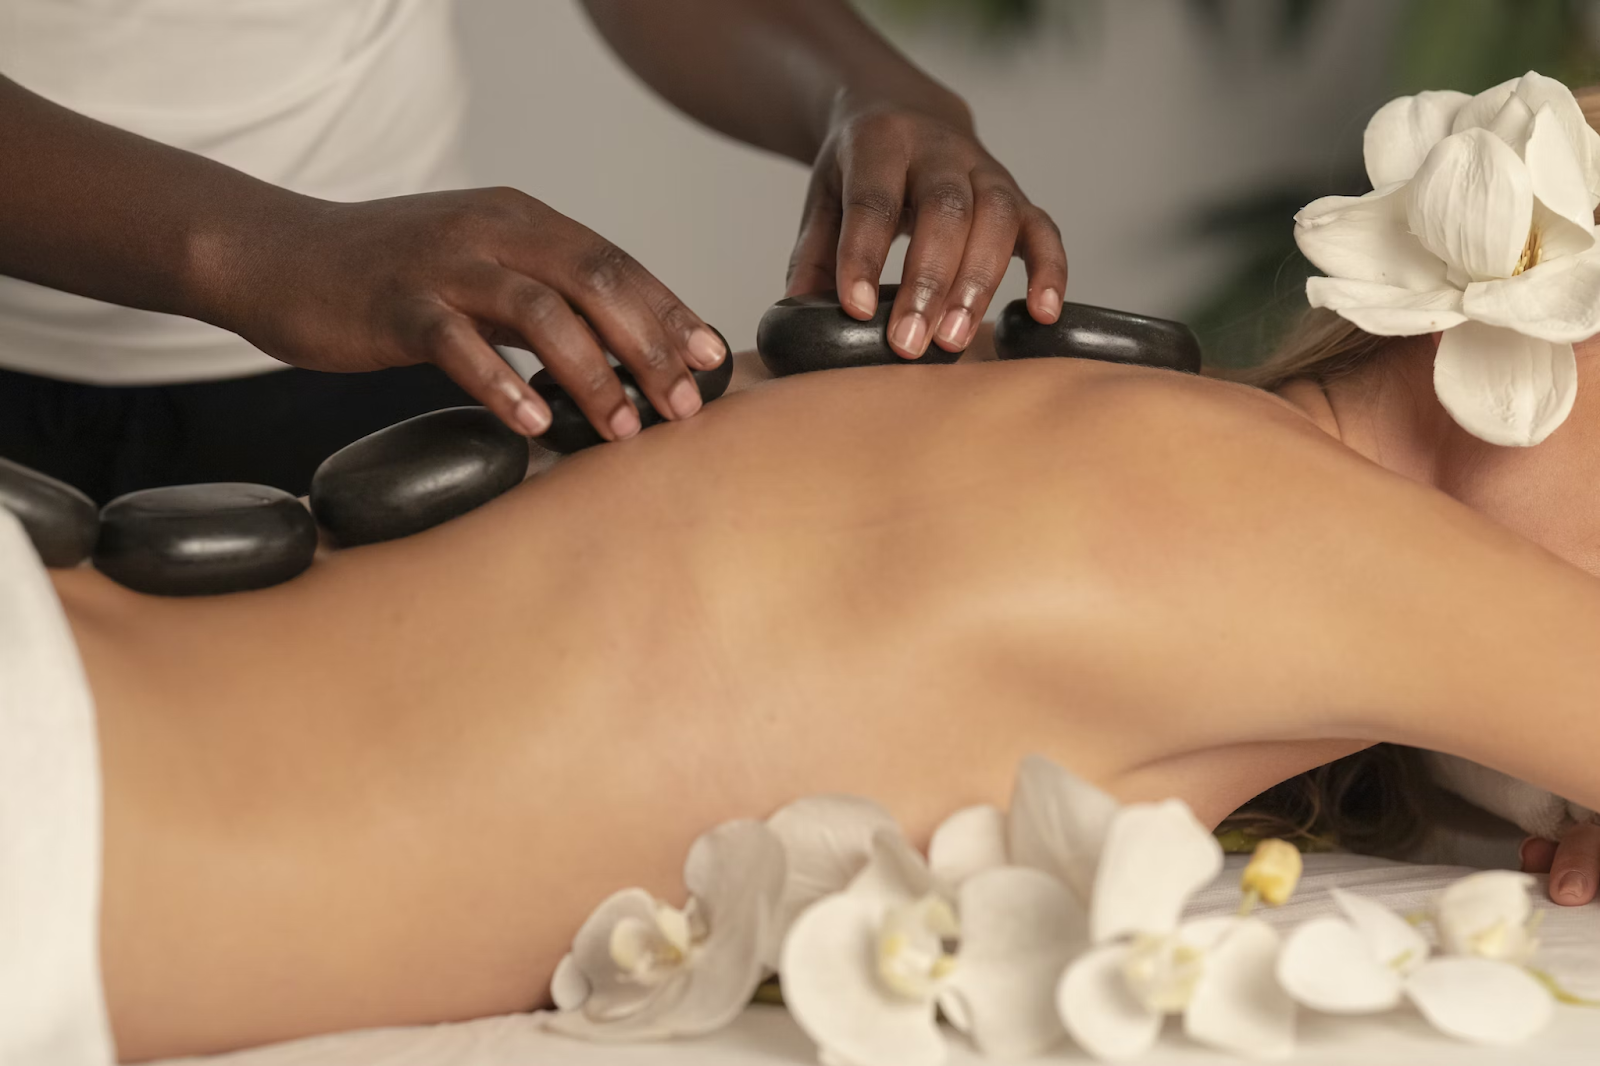 Woman getting a hot stone massage to combat stress. A massage therapist is placing the large stones in the middle of the woman's back as she relaxes.